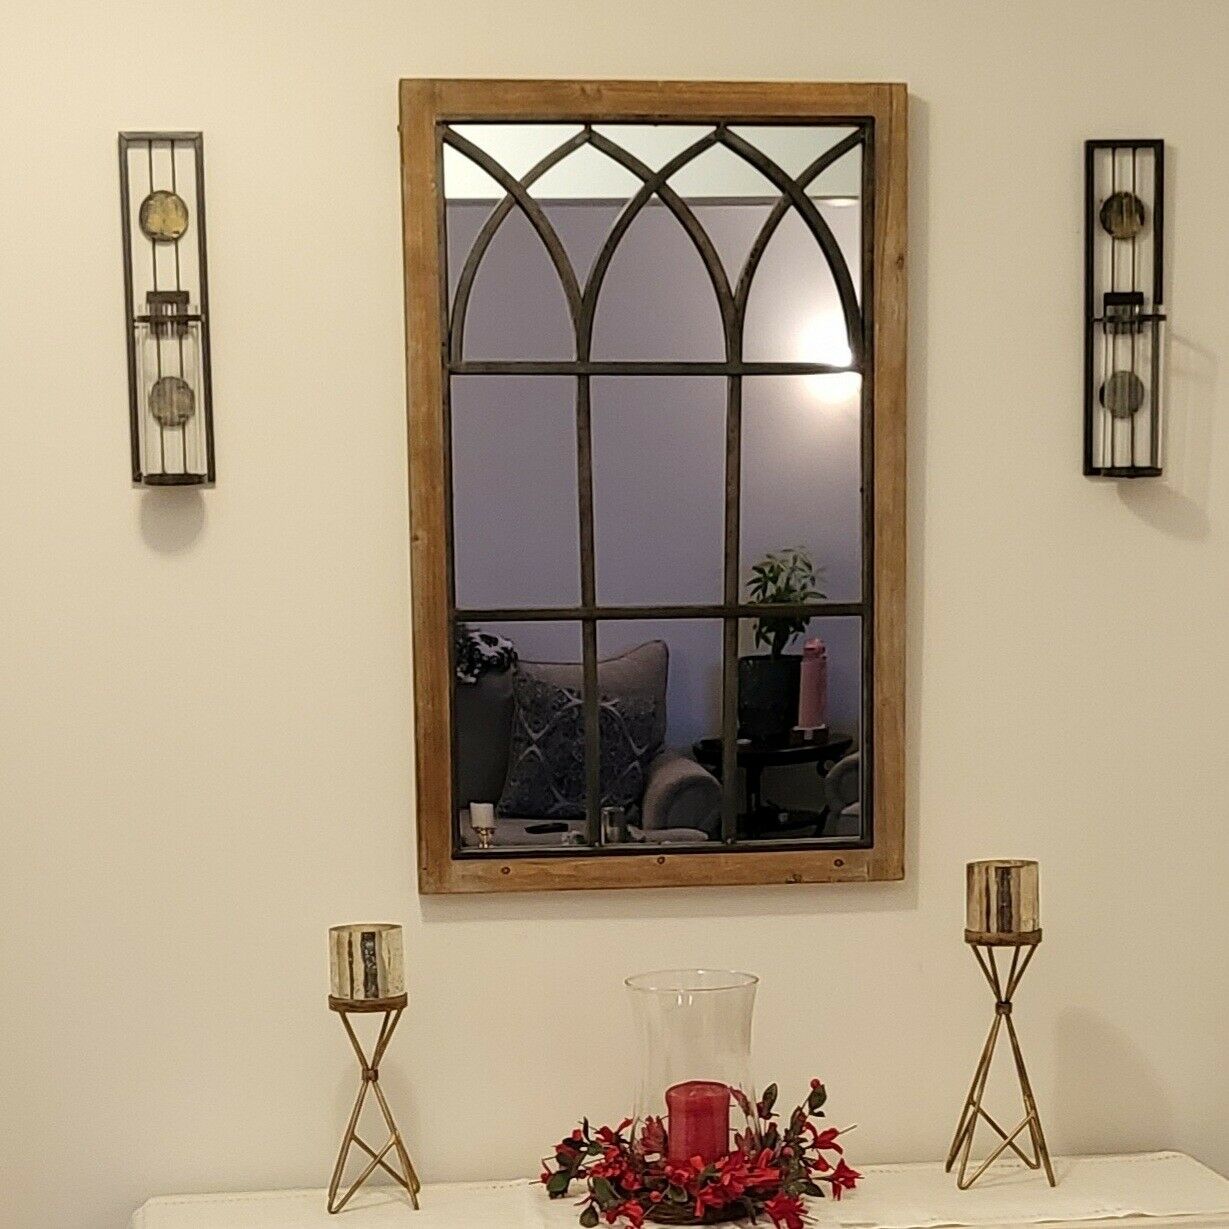 Large Farmhouse Window Wall Mirror Wood Frame Metal Arched Home Decor Rustic 37" - Home Decor Gifts and More